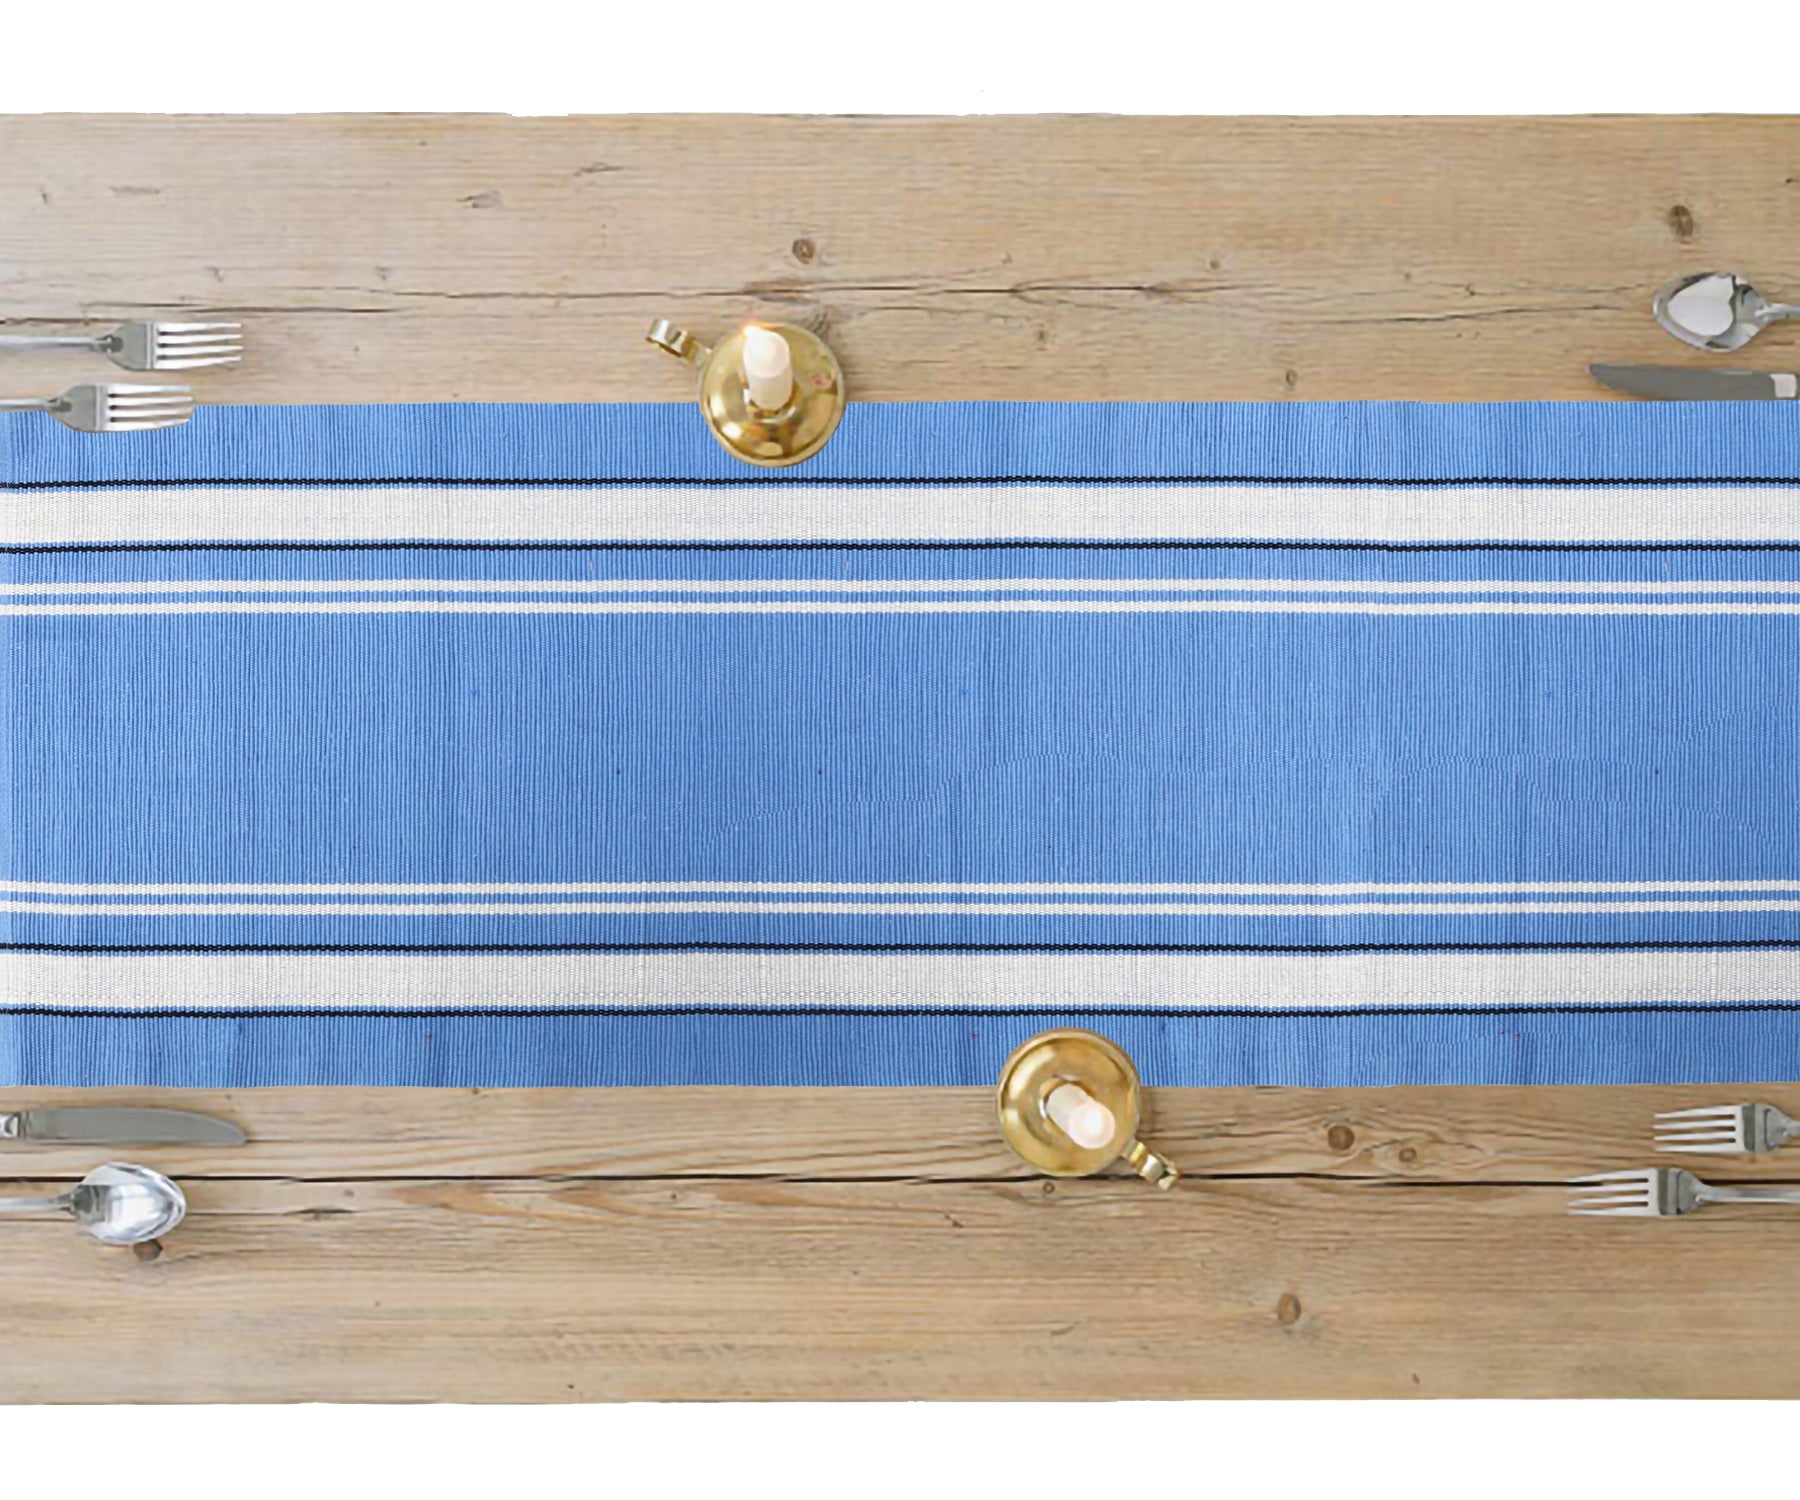 Bring warmth to your home with a cotton table runner, a sustainable choice for everyday decor.